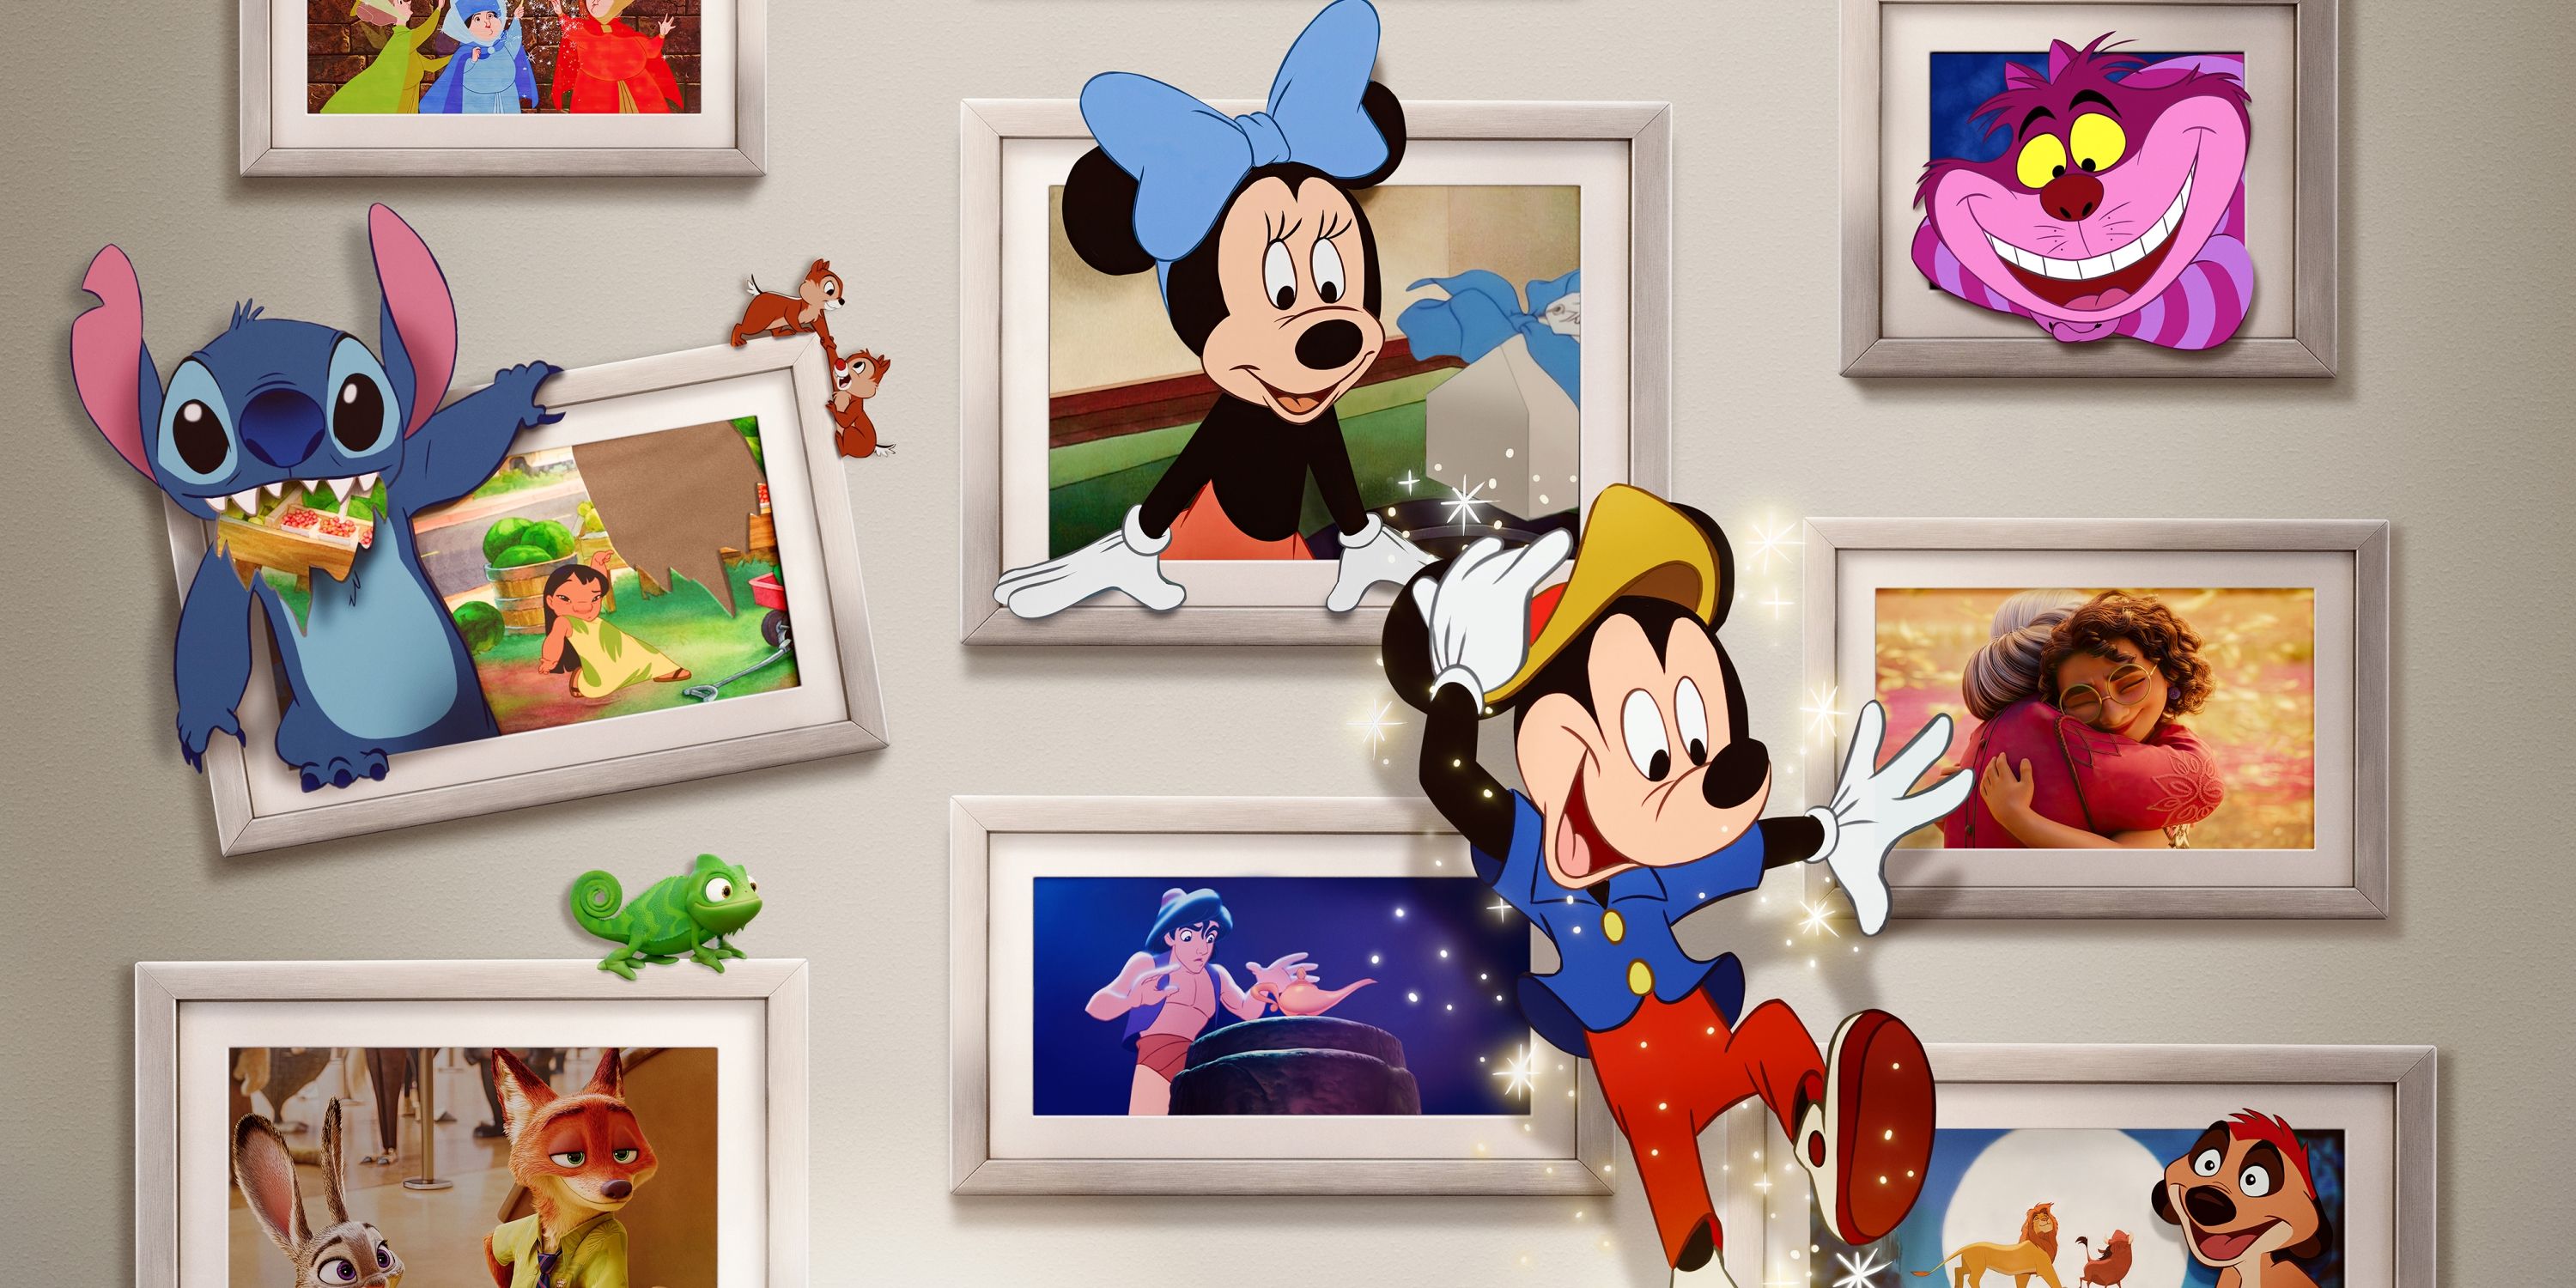 Mickey Mouse and Minnie Mouse in the Once Upon A Studio short